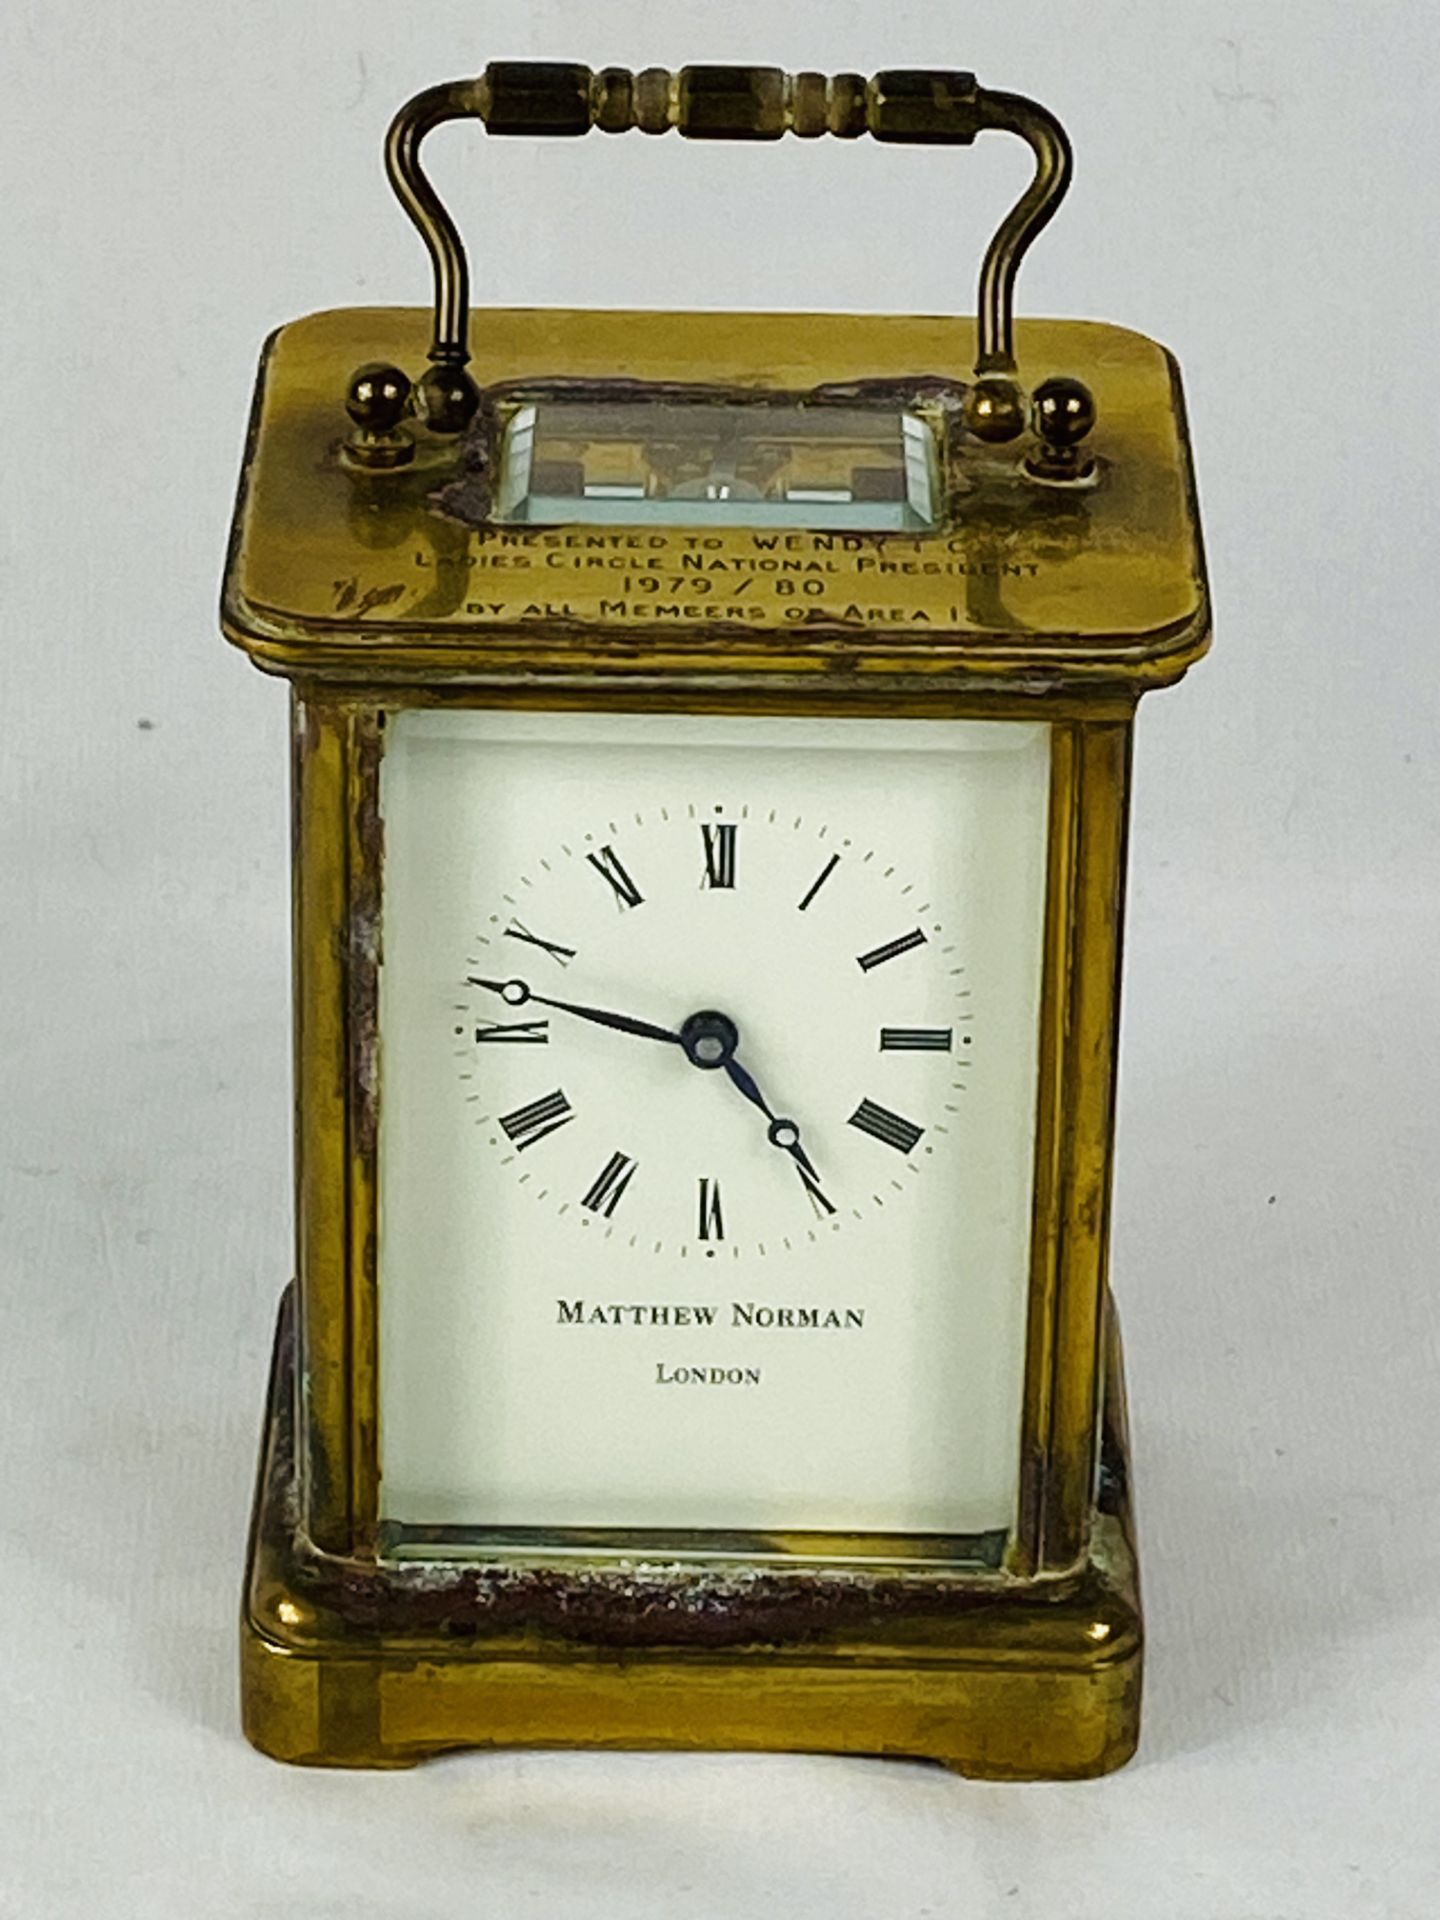 Matthew Norman brass cased carriage clock with bevel edged glass engraved to top,